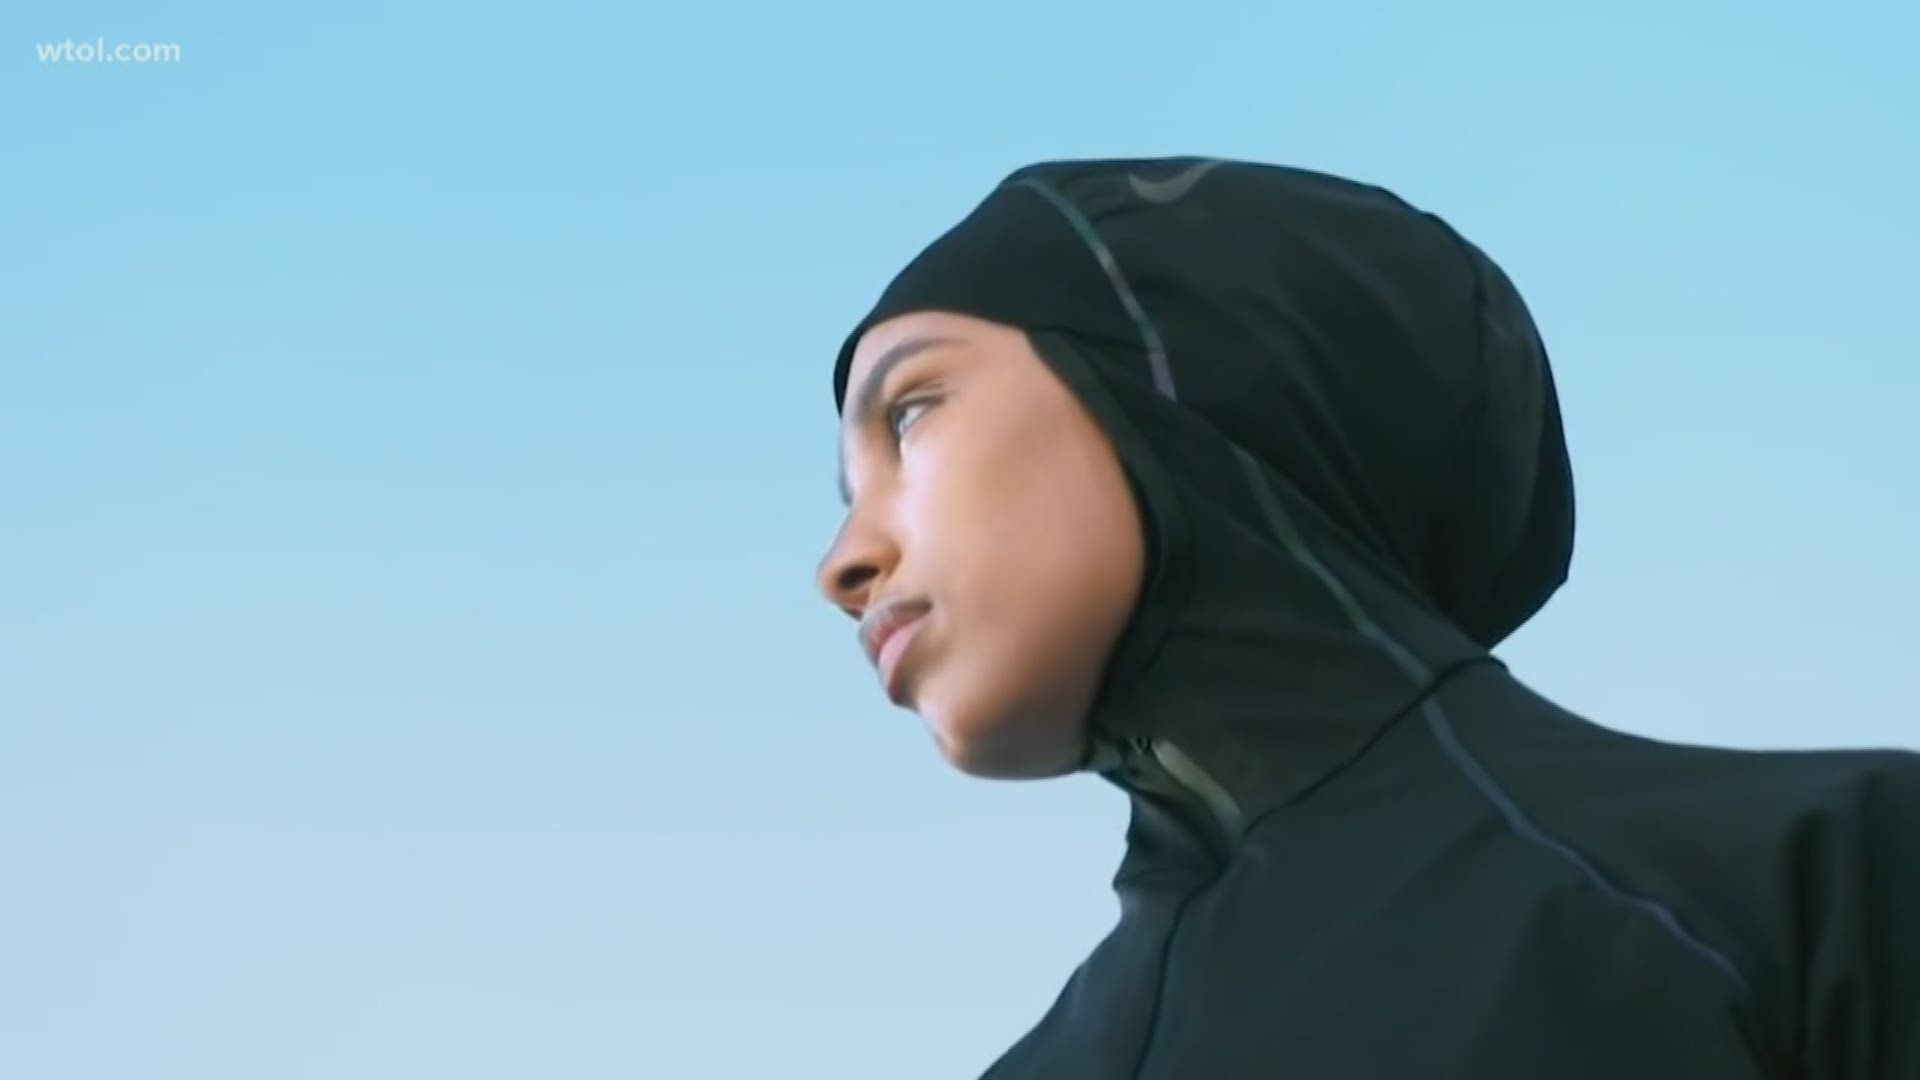 The effort came into being after Noor Abukaram, a cross country runner for Sylvania Northview, was disqualified after wearing her hijab at a meet in 2019.